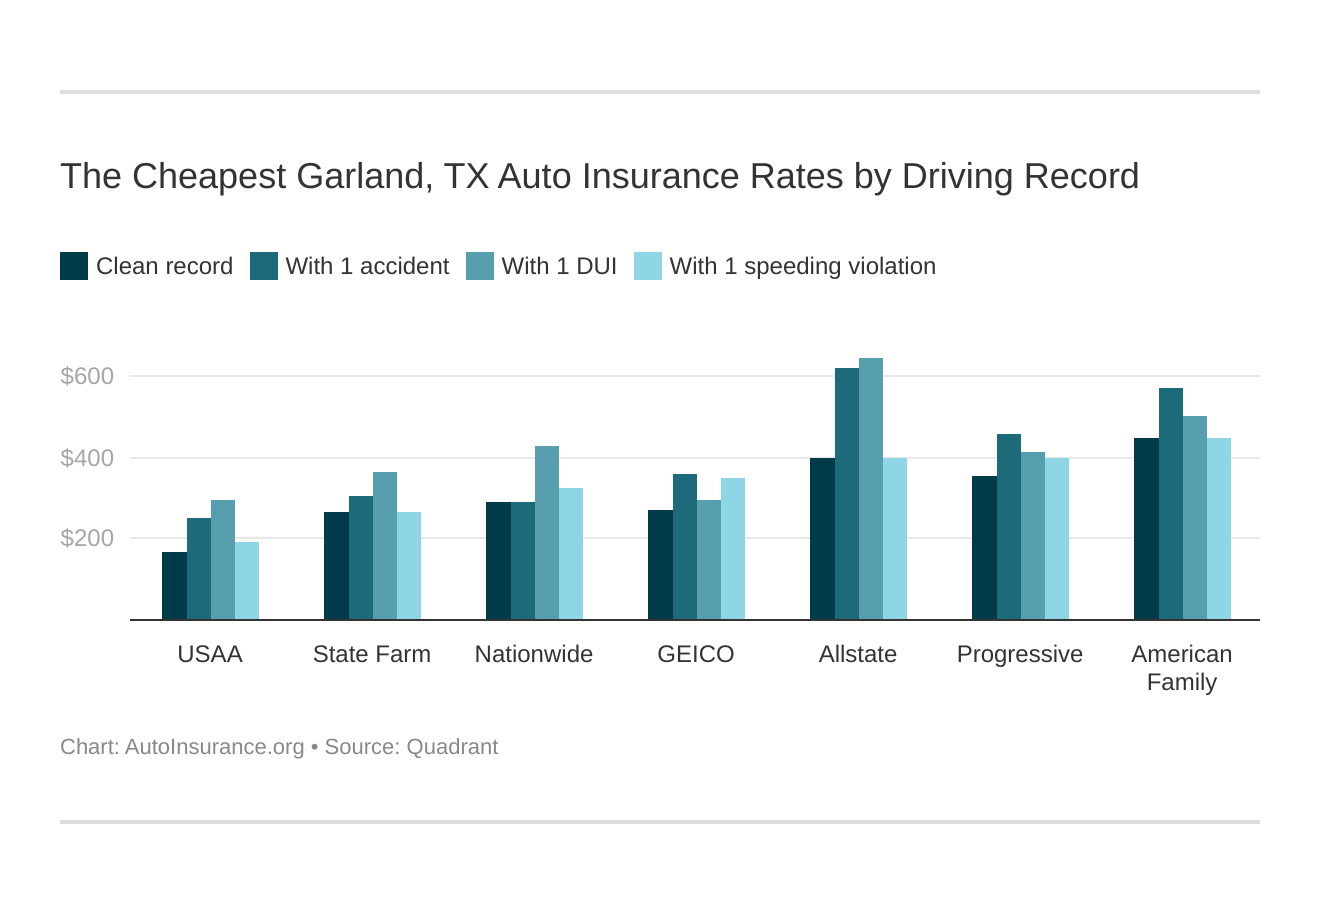 The Cheapest Garland, TX Auto Insurance Rates by Driving Record